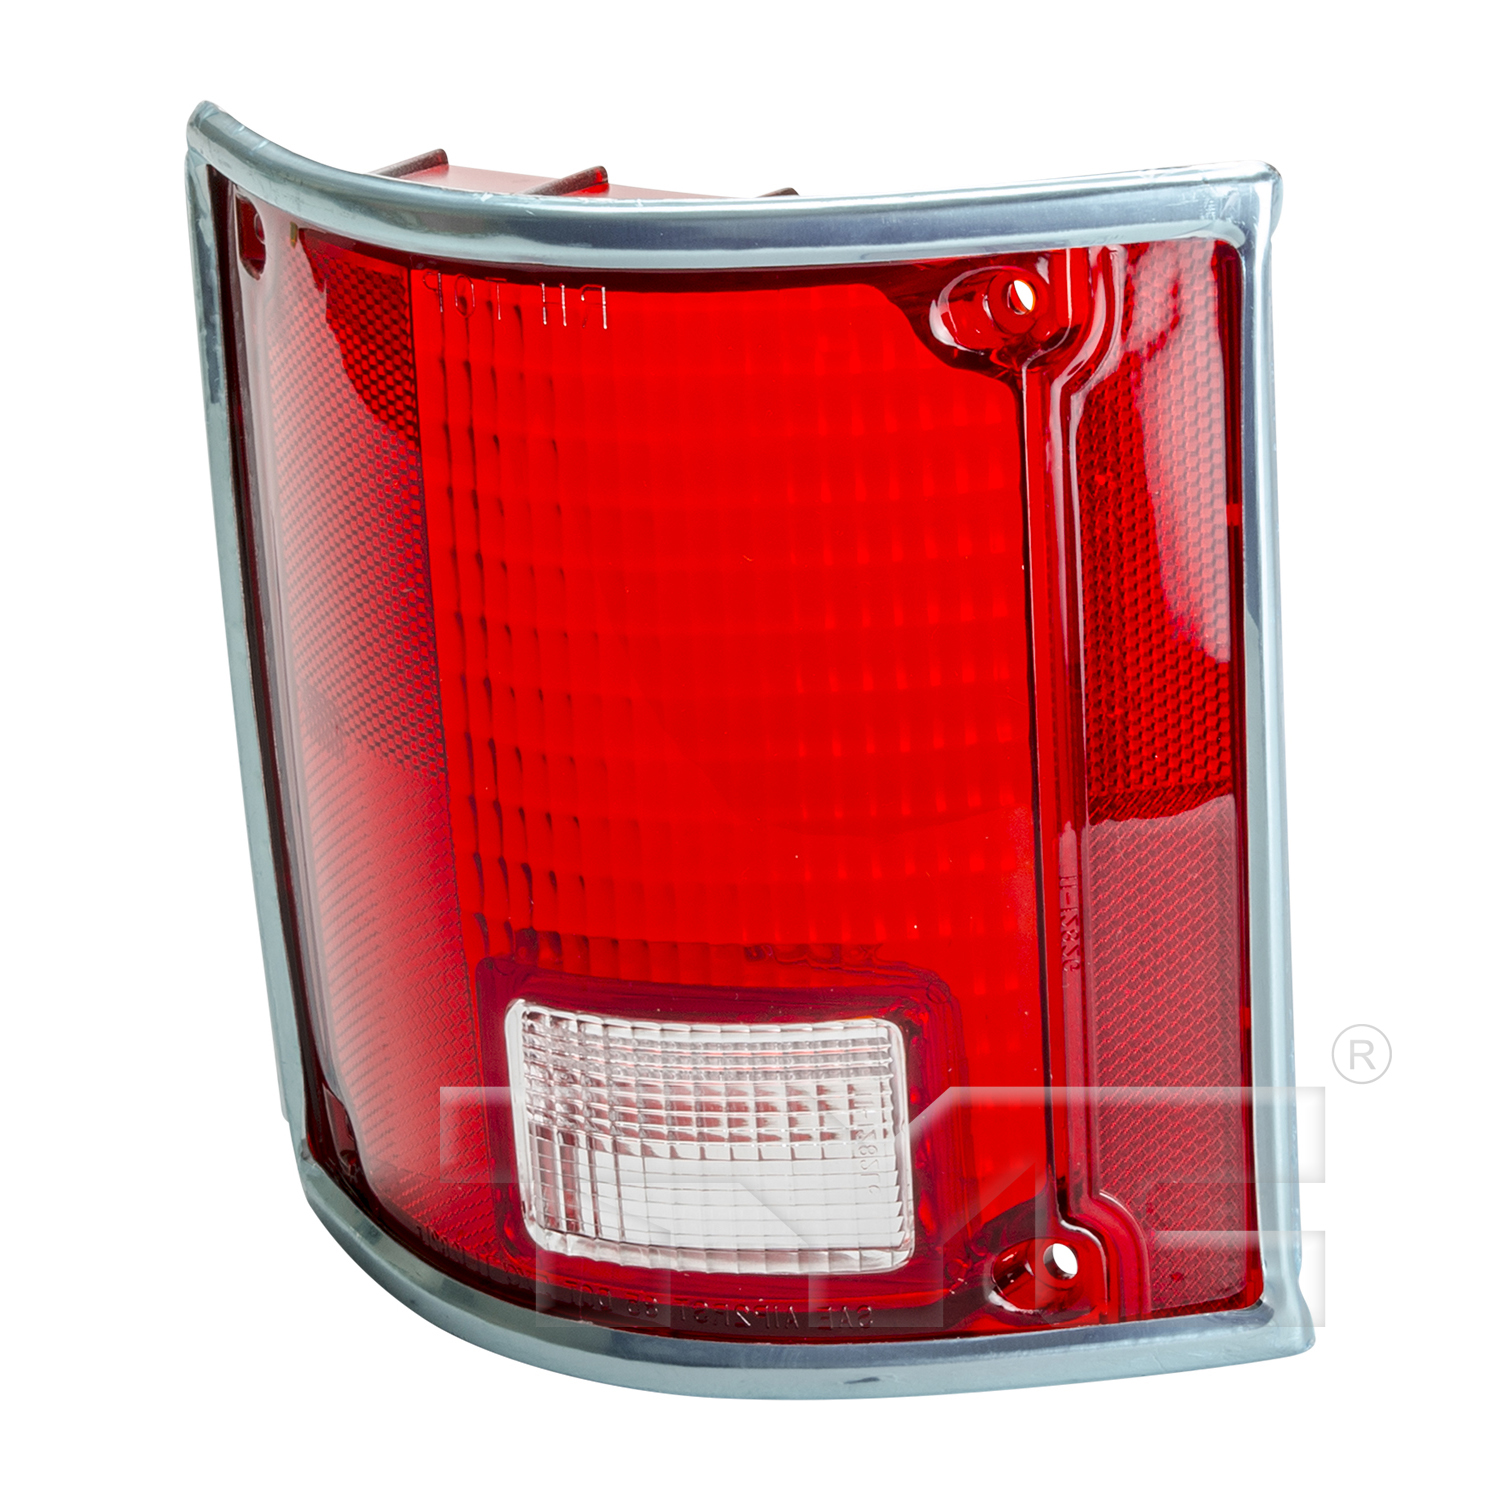 Aftermarket TAILLIGHTS for GMC - JIMMY, JIMMY,73-91,LT Taillamp lens